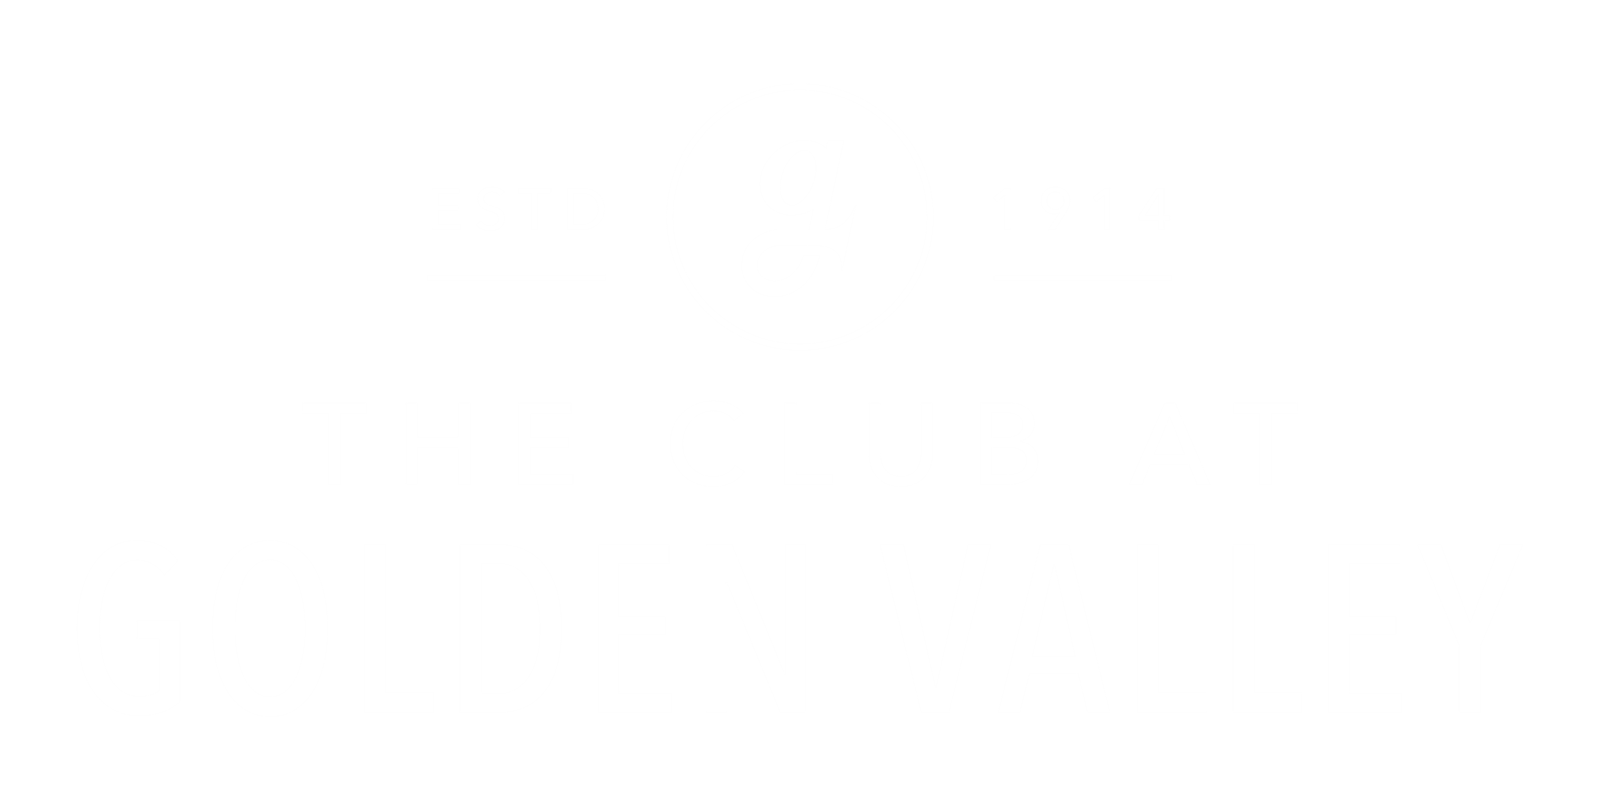 Golden Valley Country Club